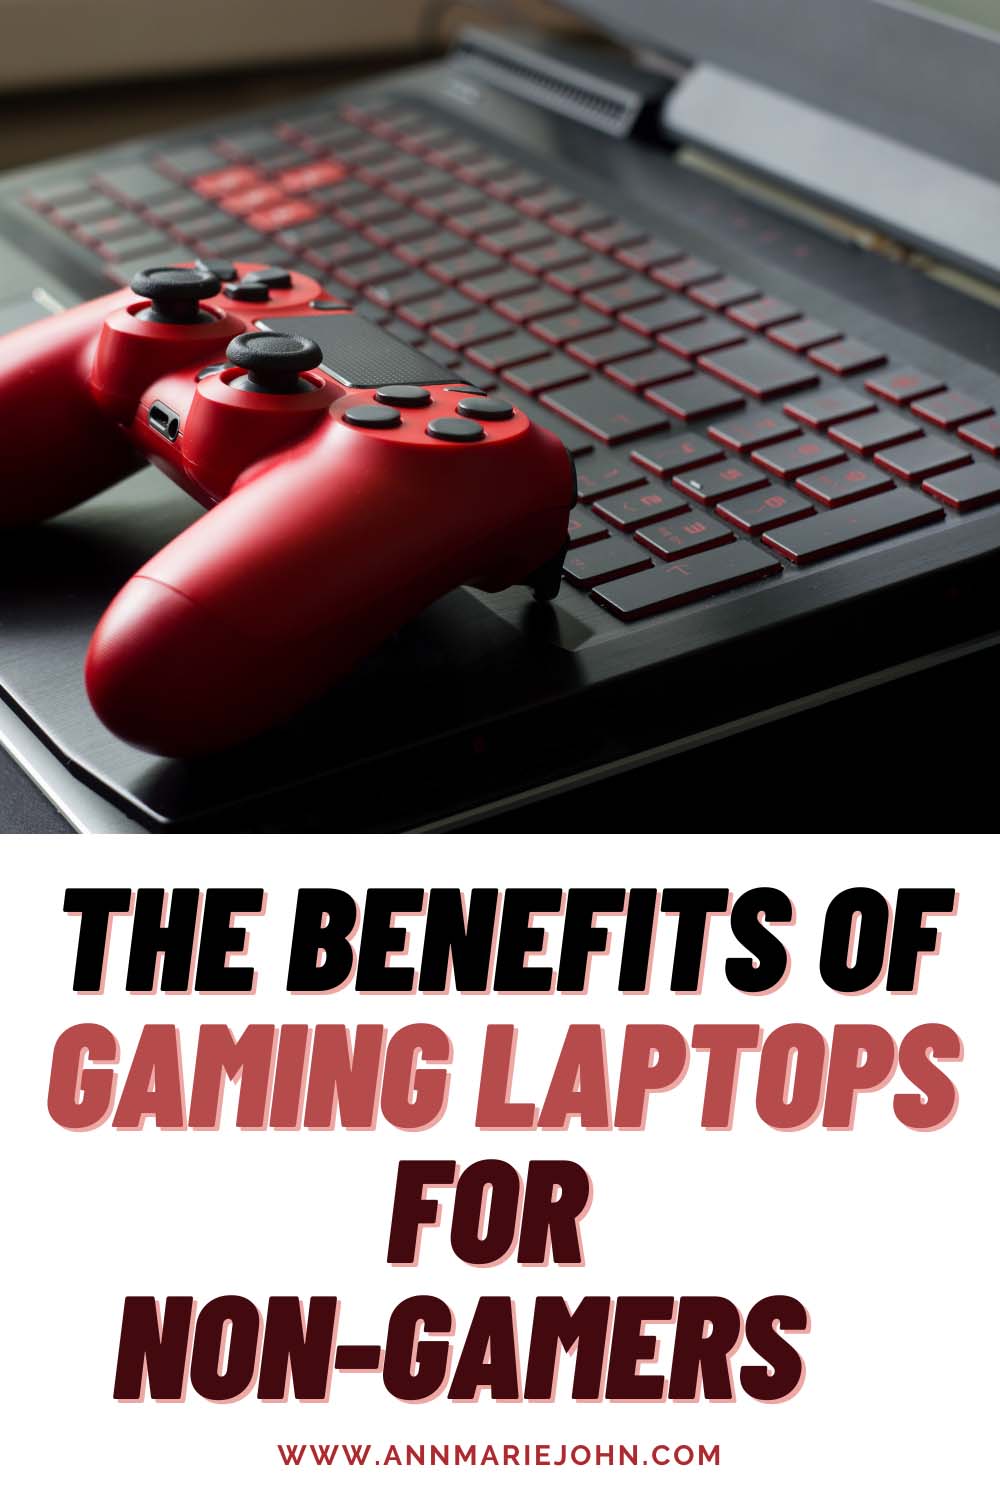 The Benefits of Gaming Laptops for Non-Gamers 